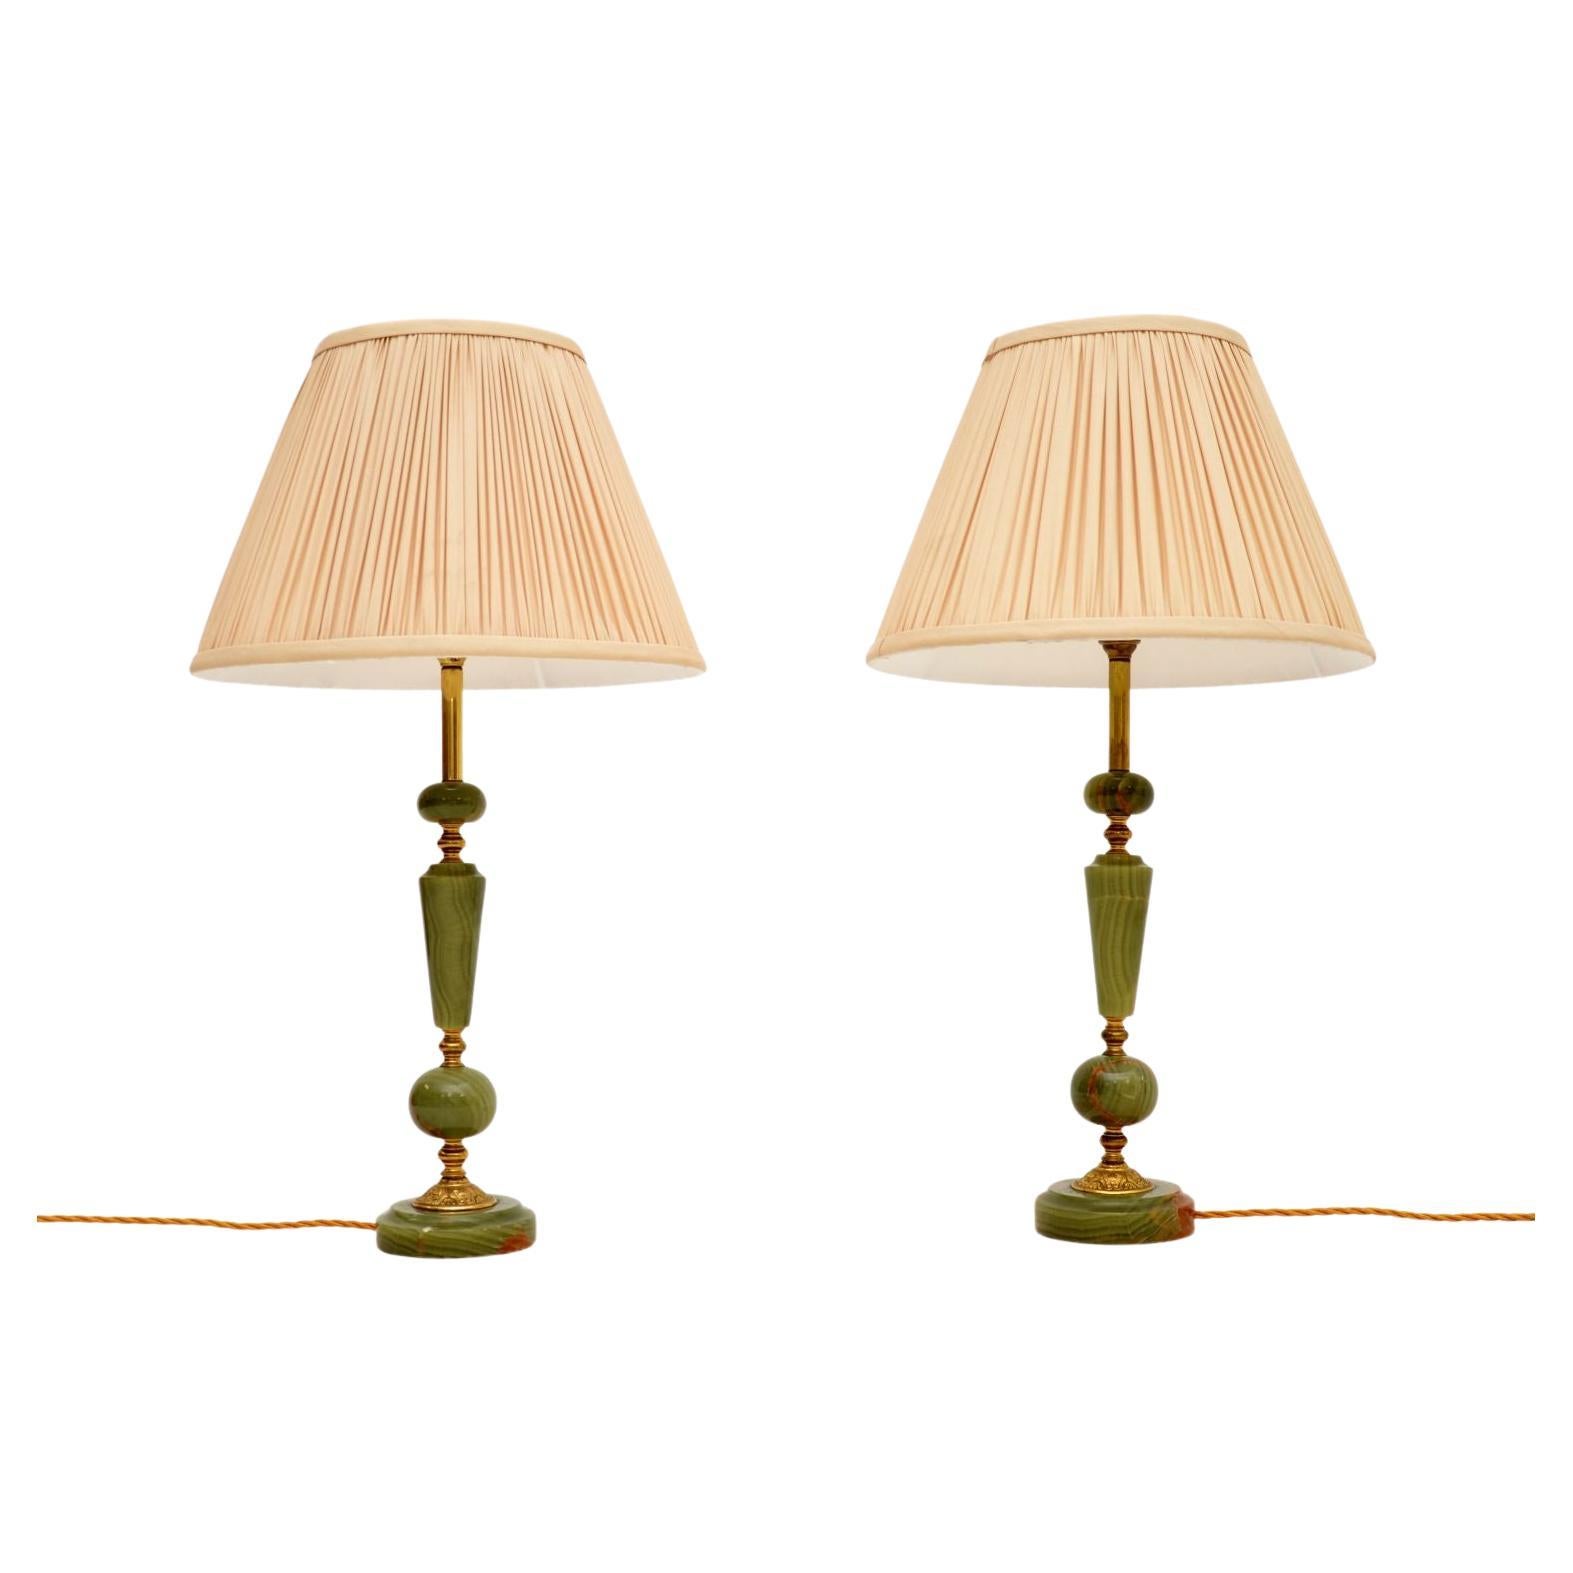 Pair of Antique French Onyx & Brass Table Lamps